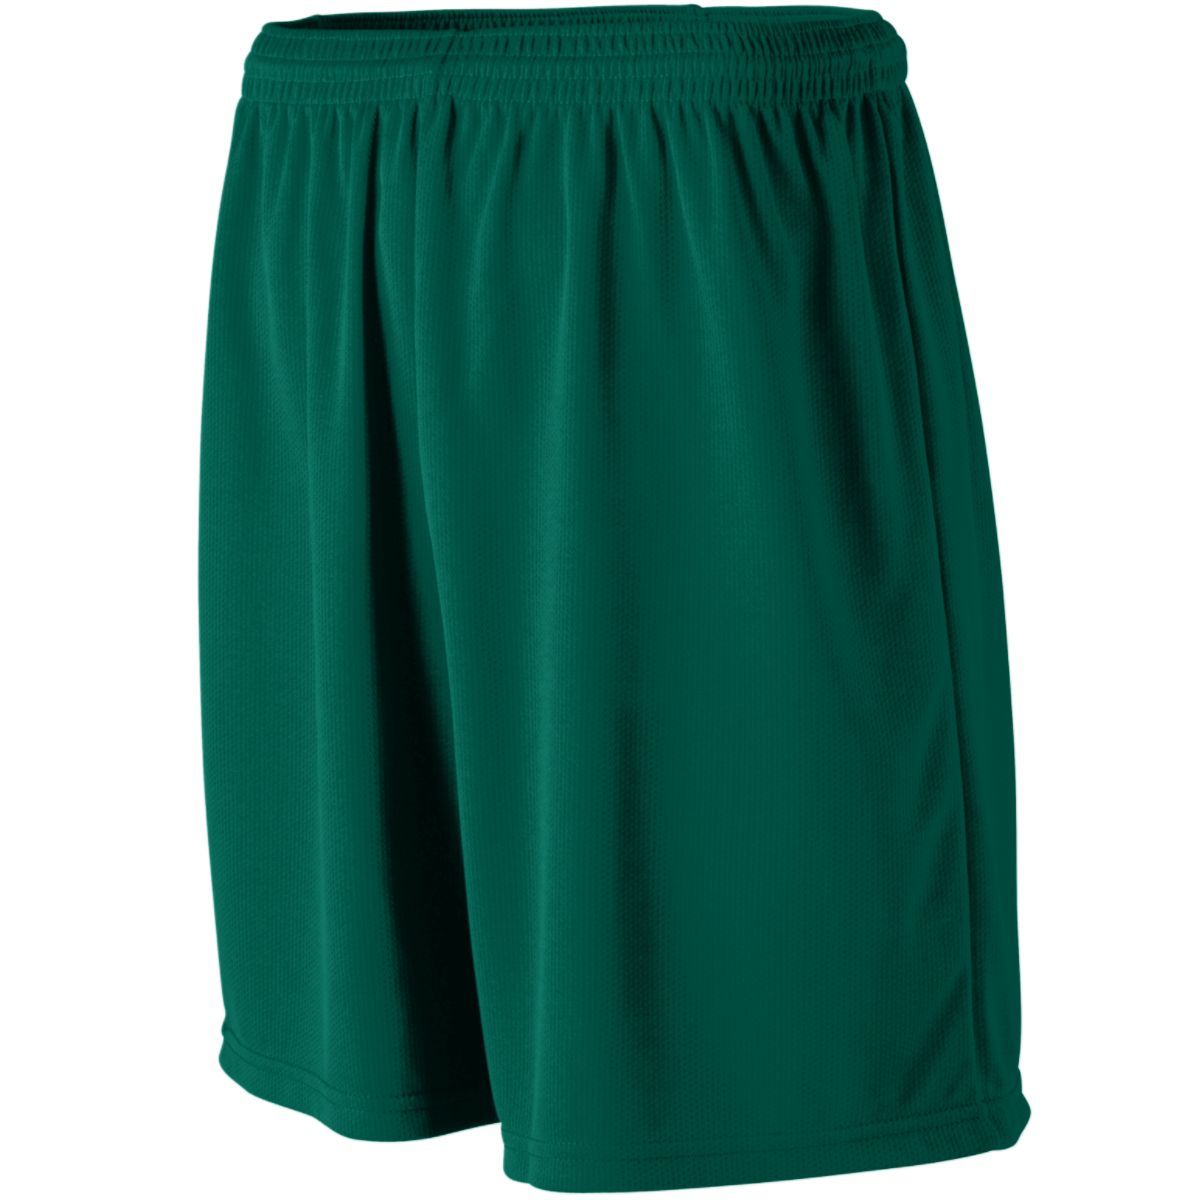 Augusta Sportswear Wicking Mesh Athletic Shorts in Dark Green  -Part of the Adult, Adult-Shorts, Augusta-Products product lines at KanaleyCreations.com